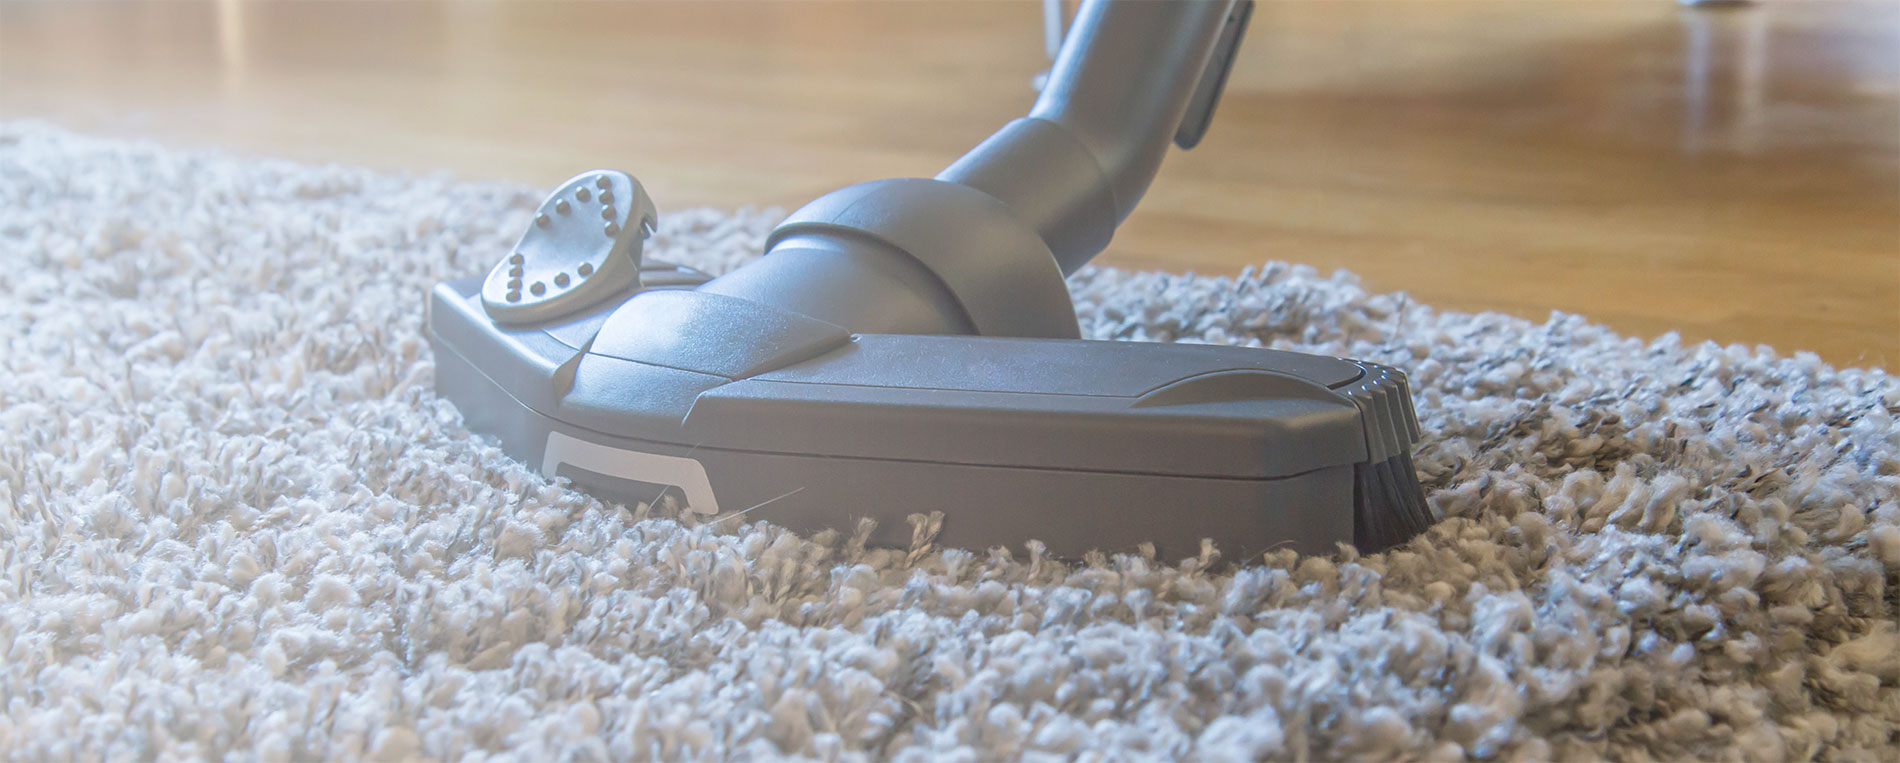 Affordable Home Carpet Cleaning, Duarte